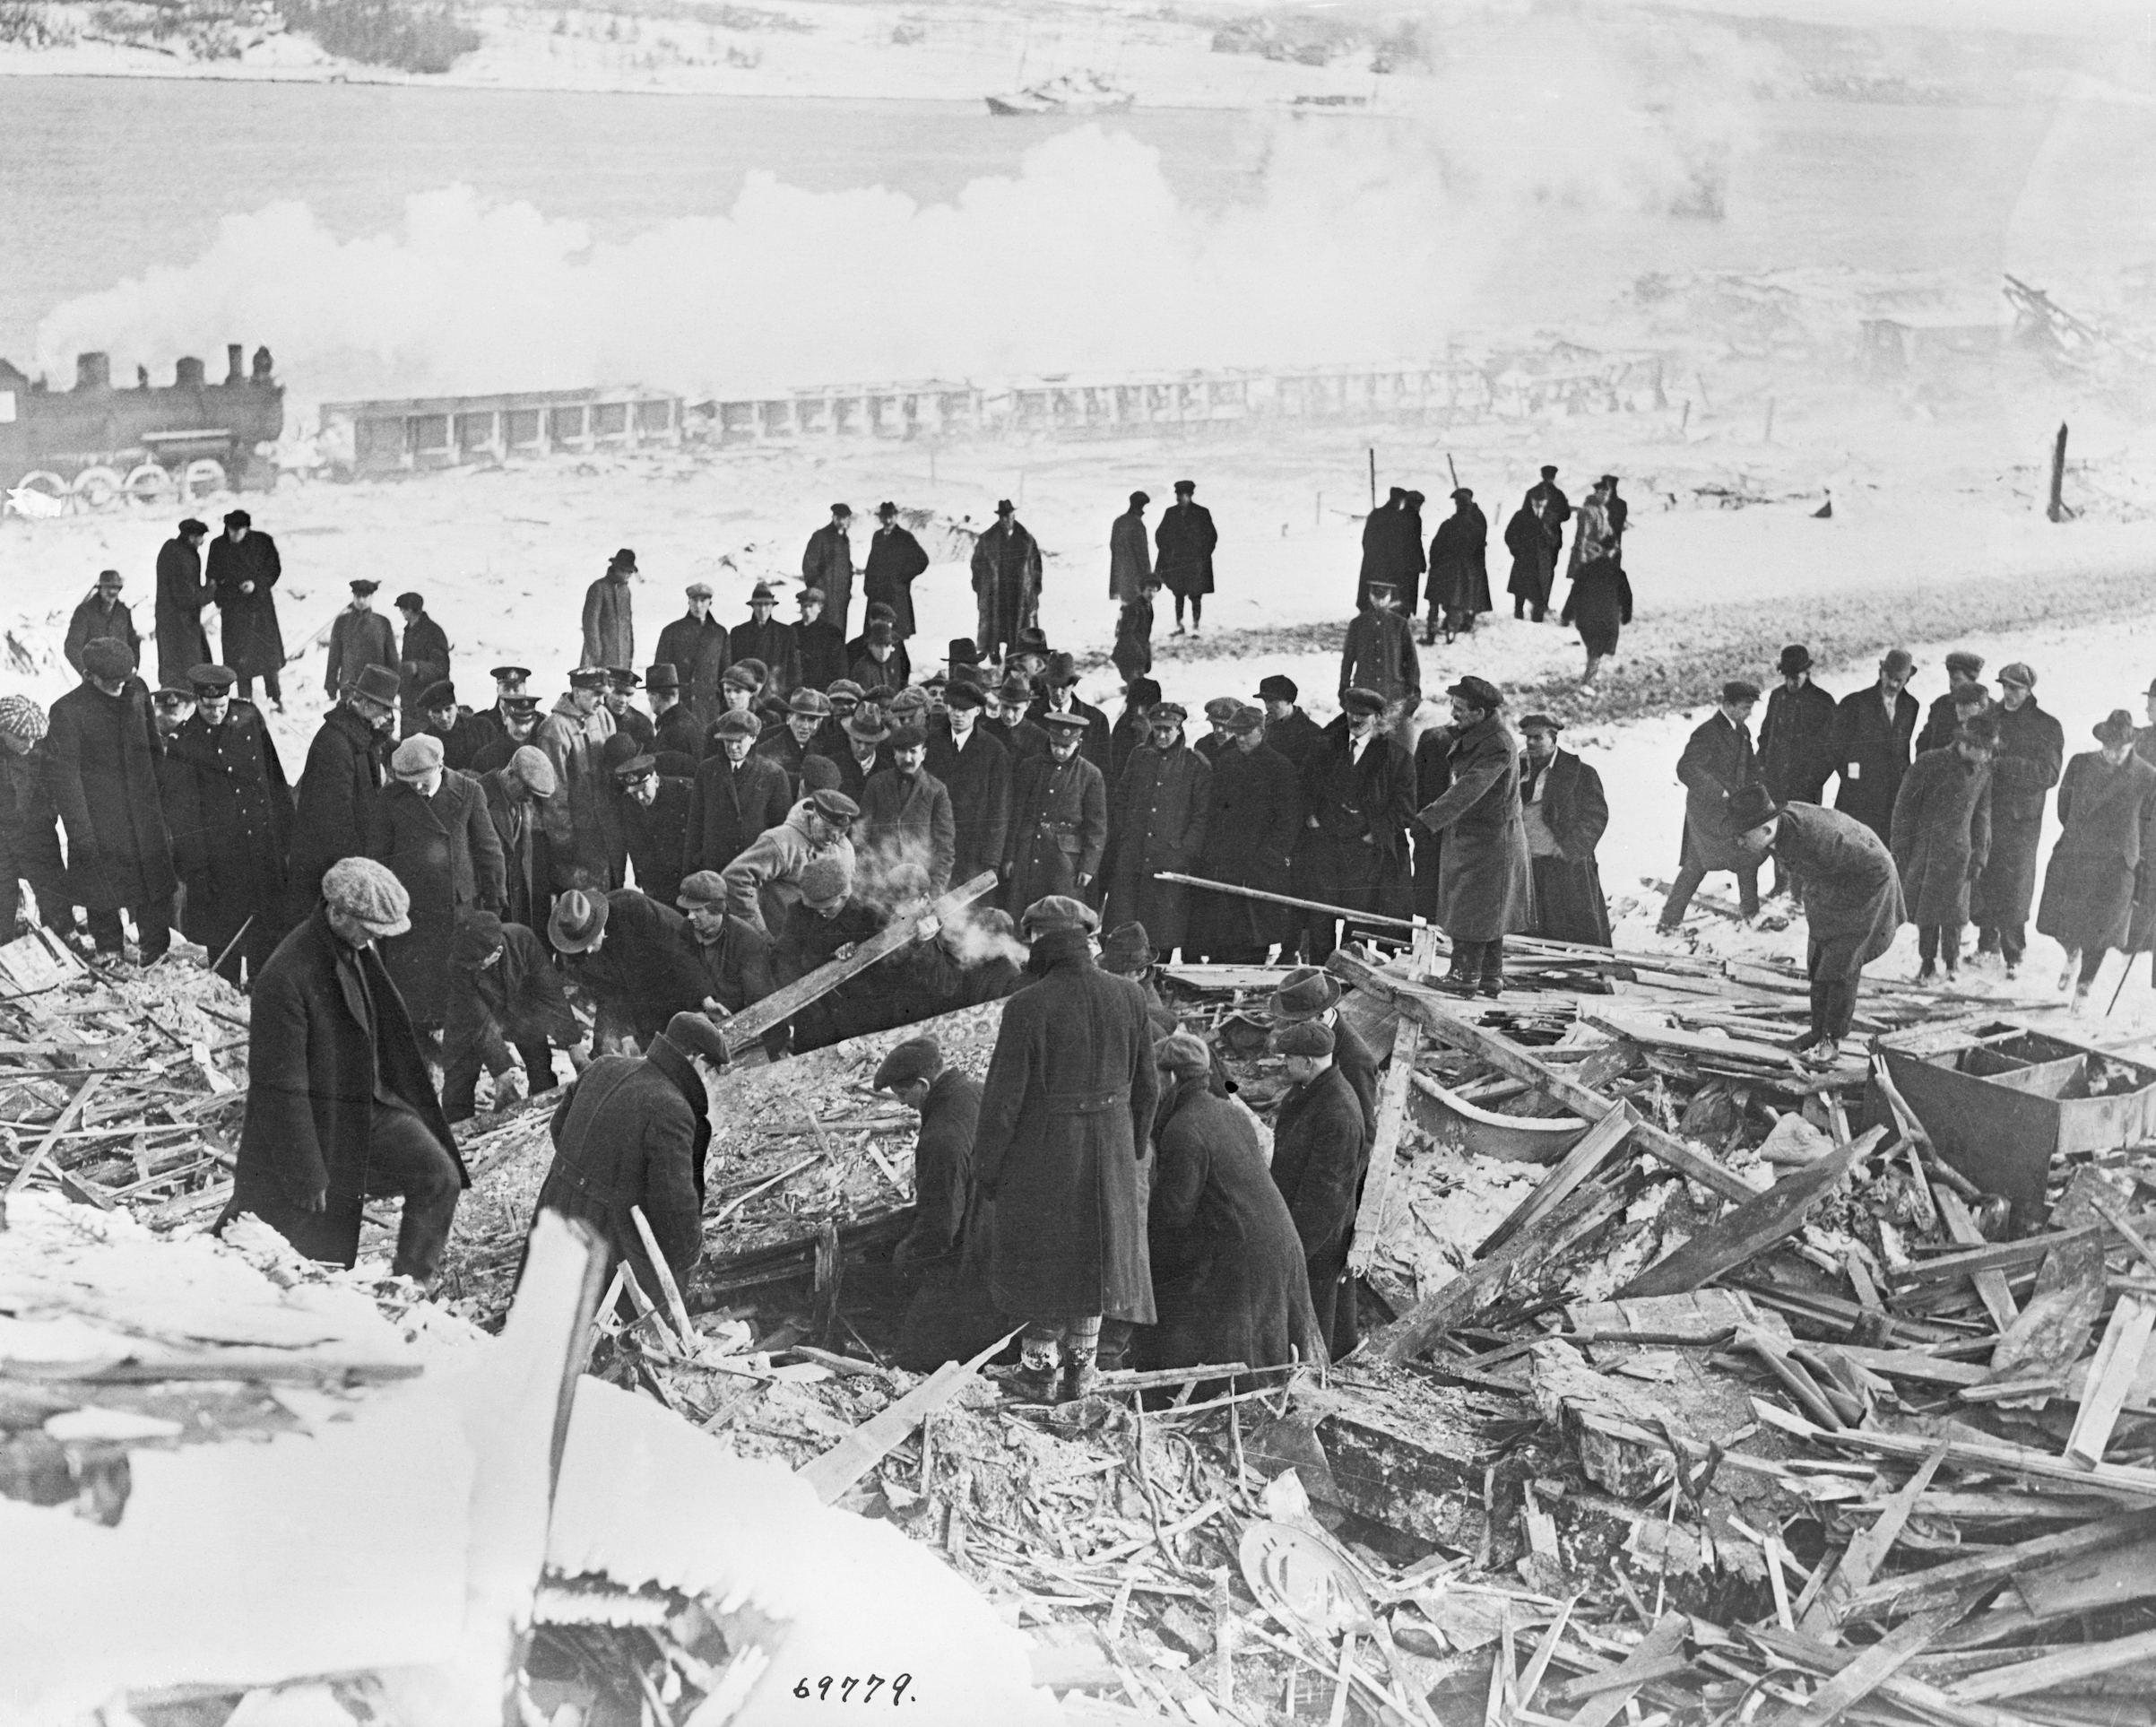 Crowd searching the ruins after the Halifax explosion, on Dec. 11, 1917 (Bettmann / Getty Images)